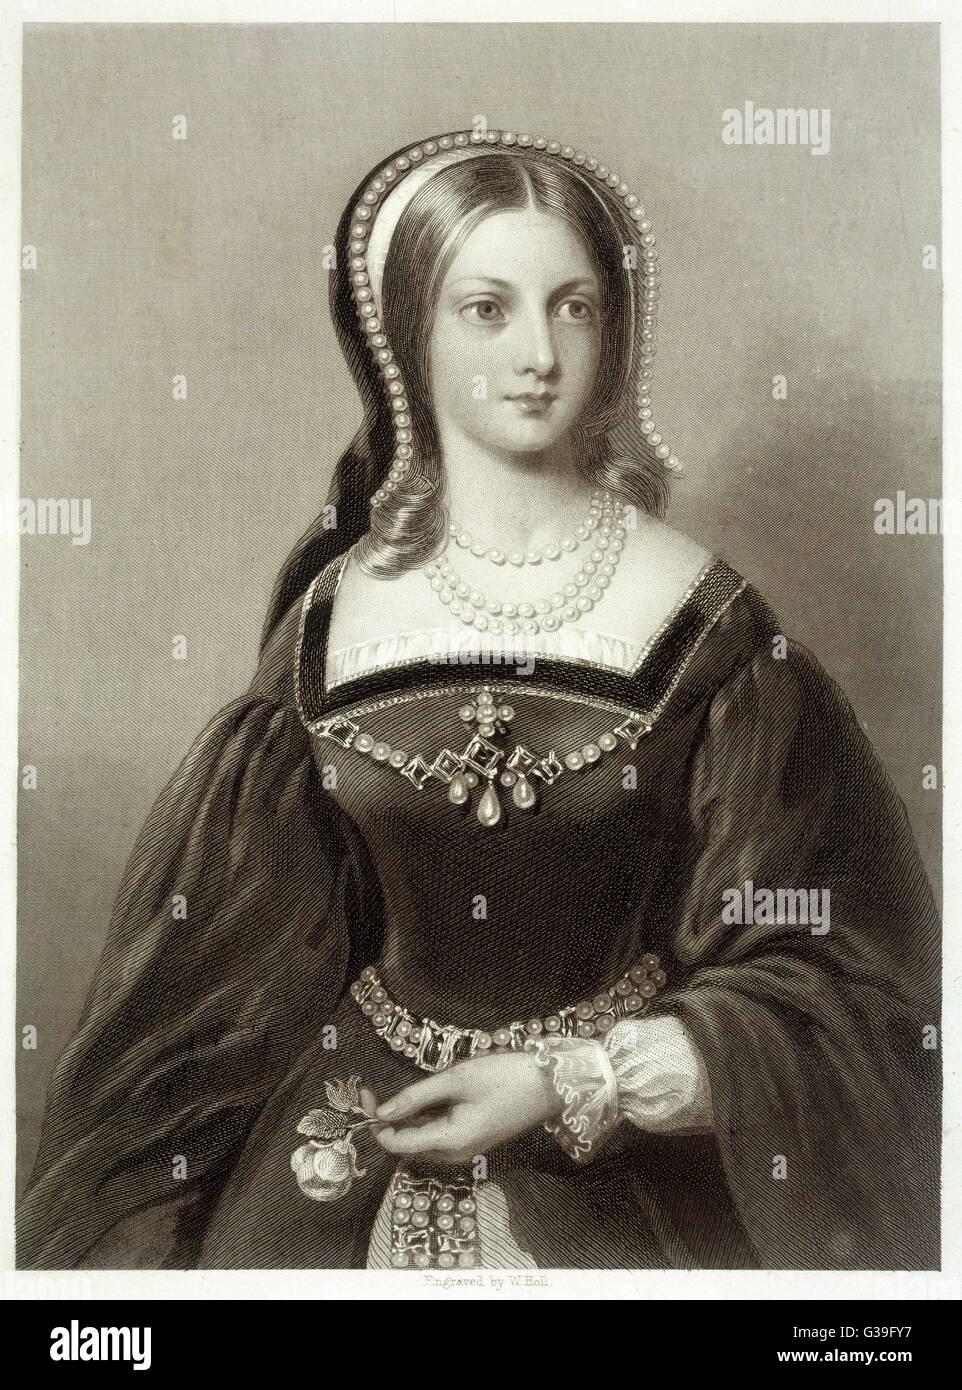 LADY JANE GREY Wife to Lord Guildford Dudley,  proclaimed Queen of England,  and beheaded on Tower Hill in London at the age of 18      Date: 1537 - 1554 Stock Photo